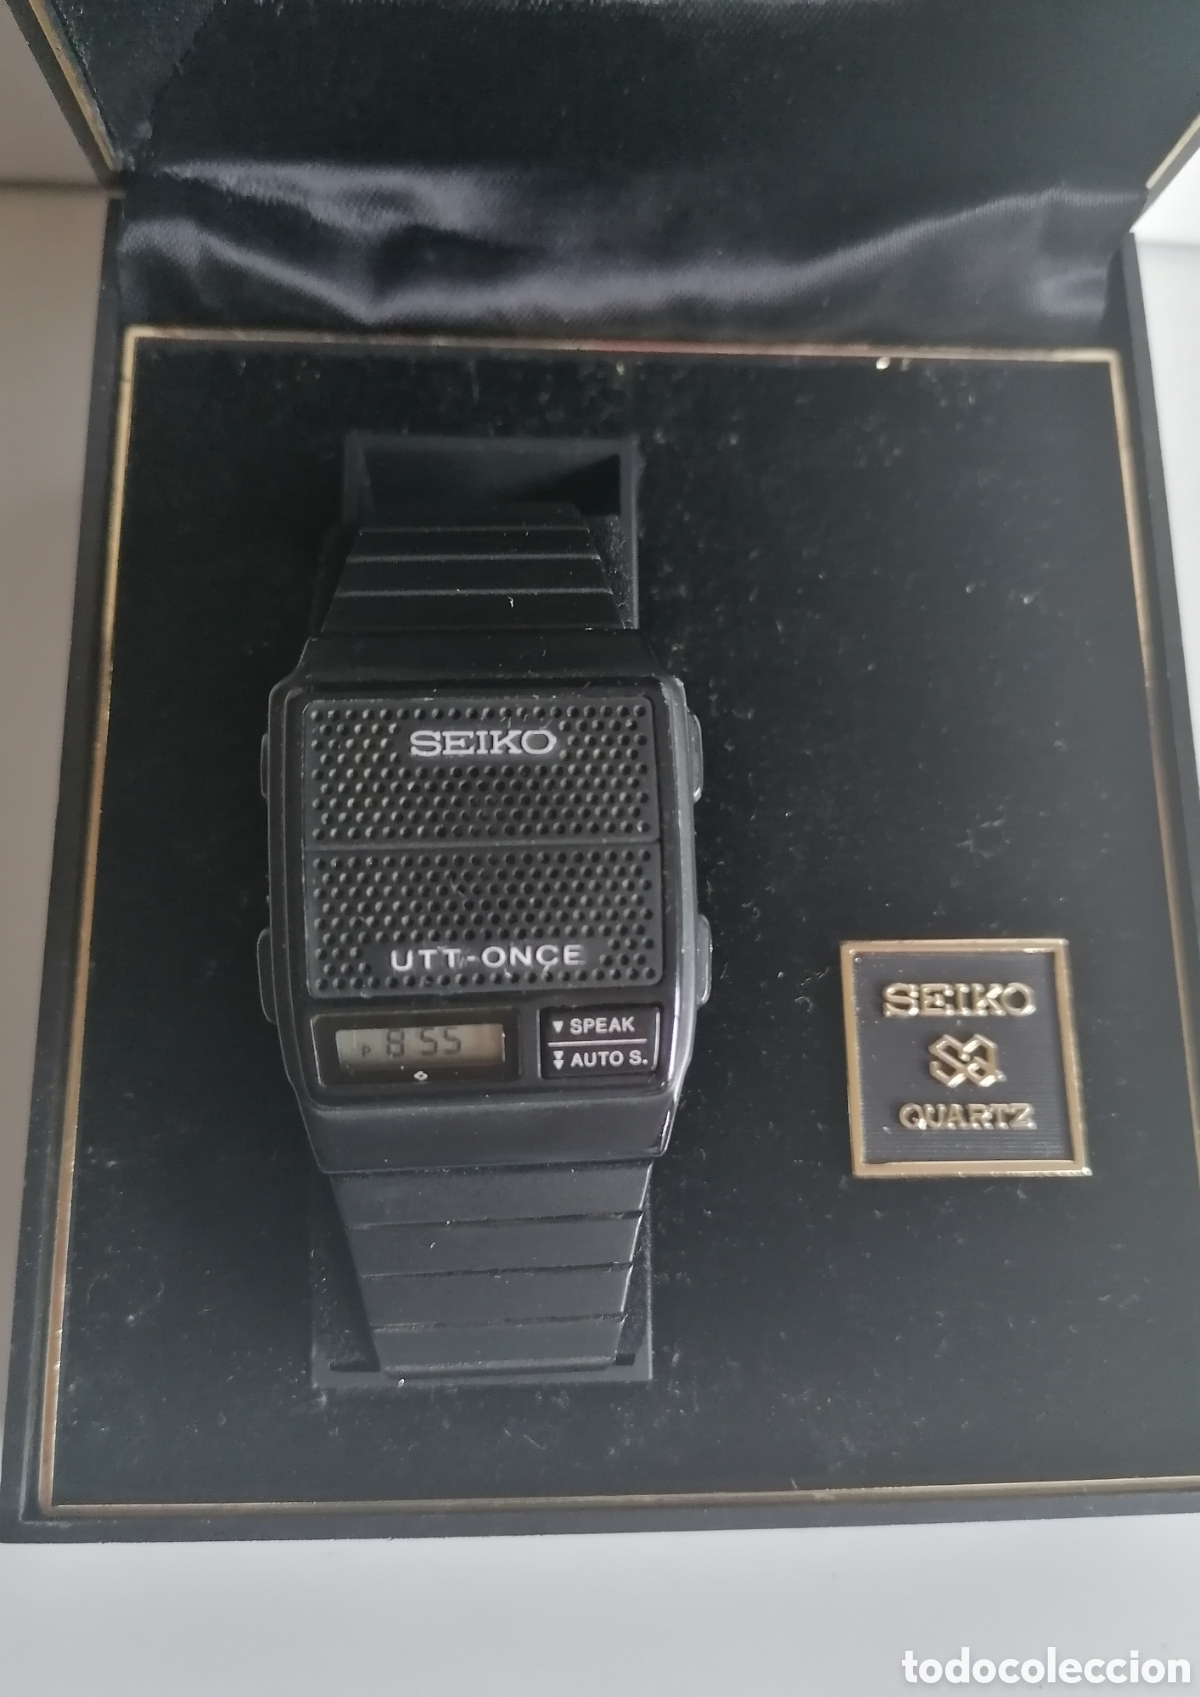 seiko - a966-4000 utt-once 1984 - Buy Vintage watches and clocks on  todocoleccion